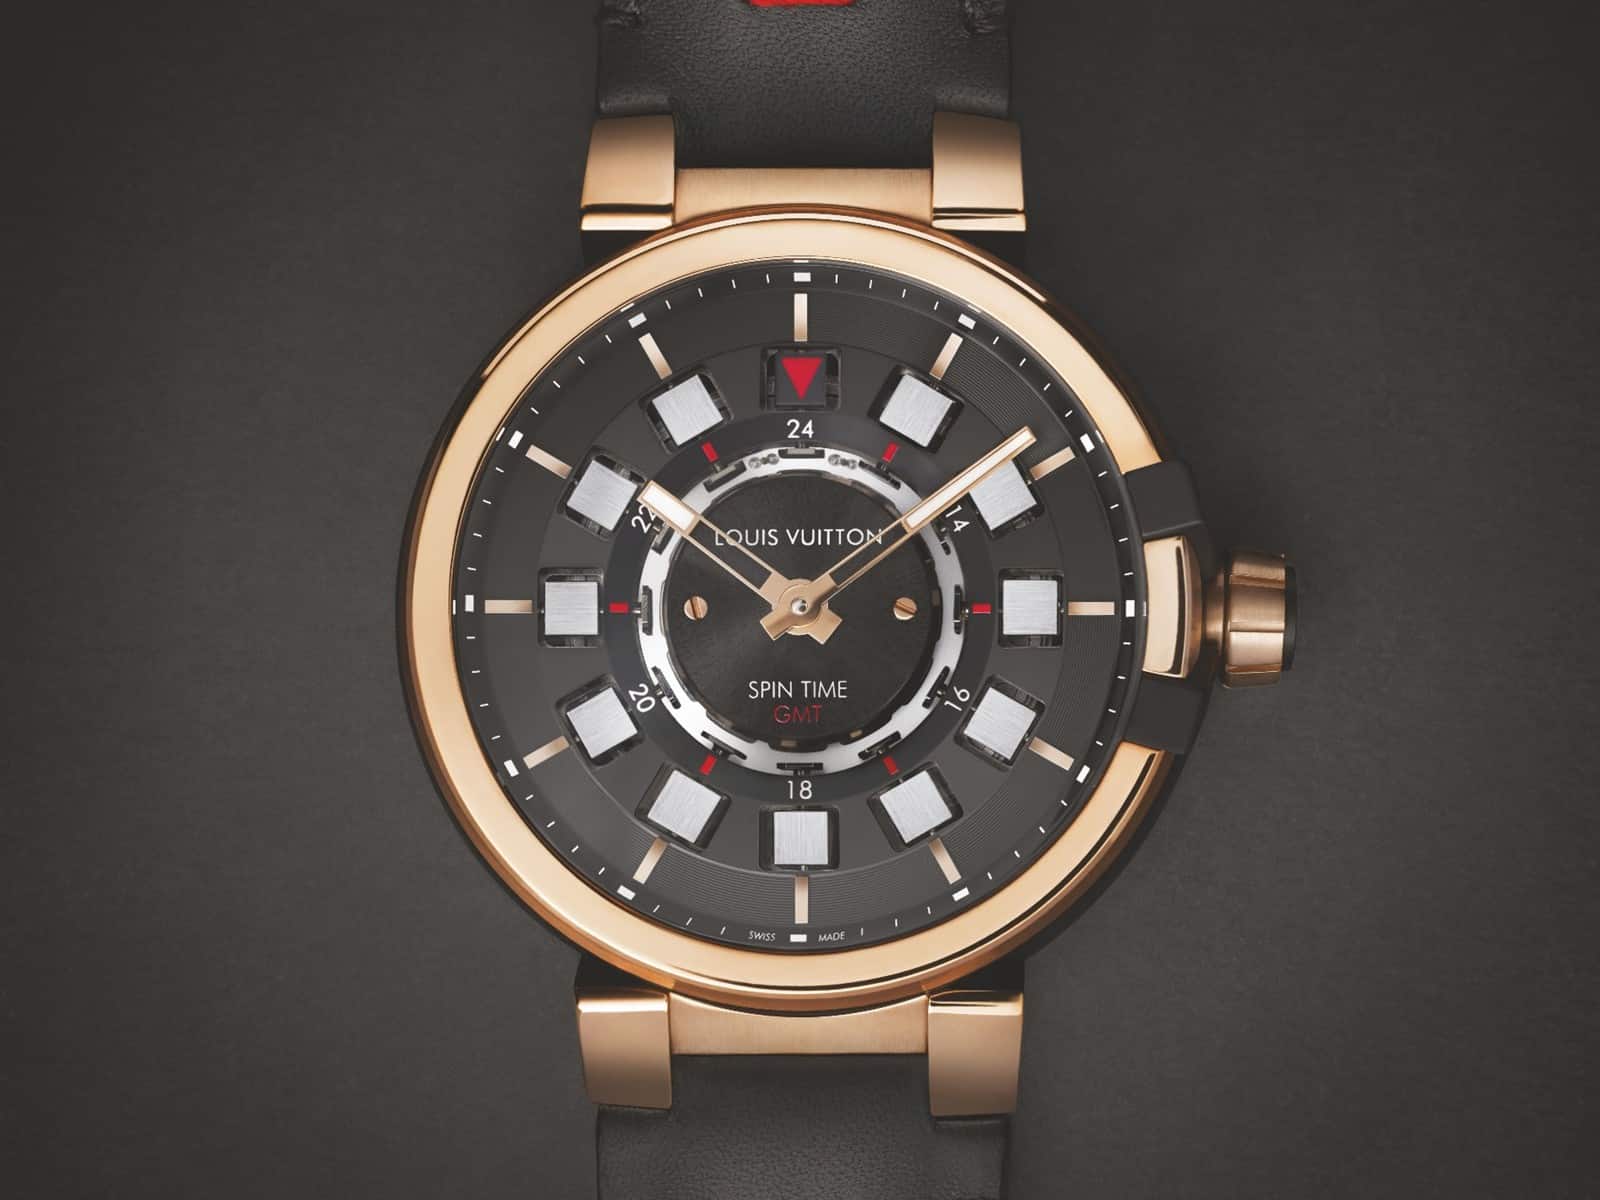 Louis Vuitton Tambour eVolution Spin Time GMT